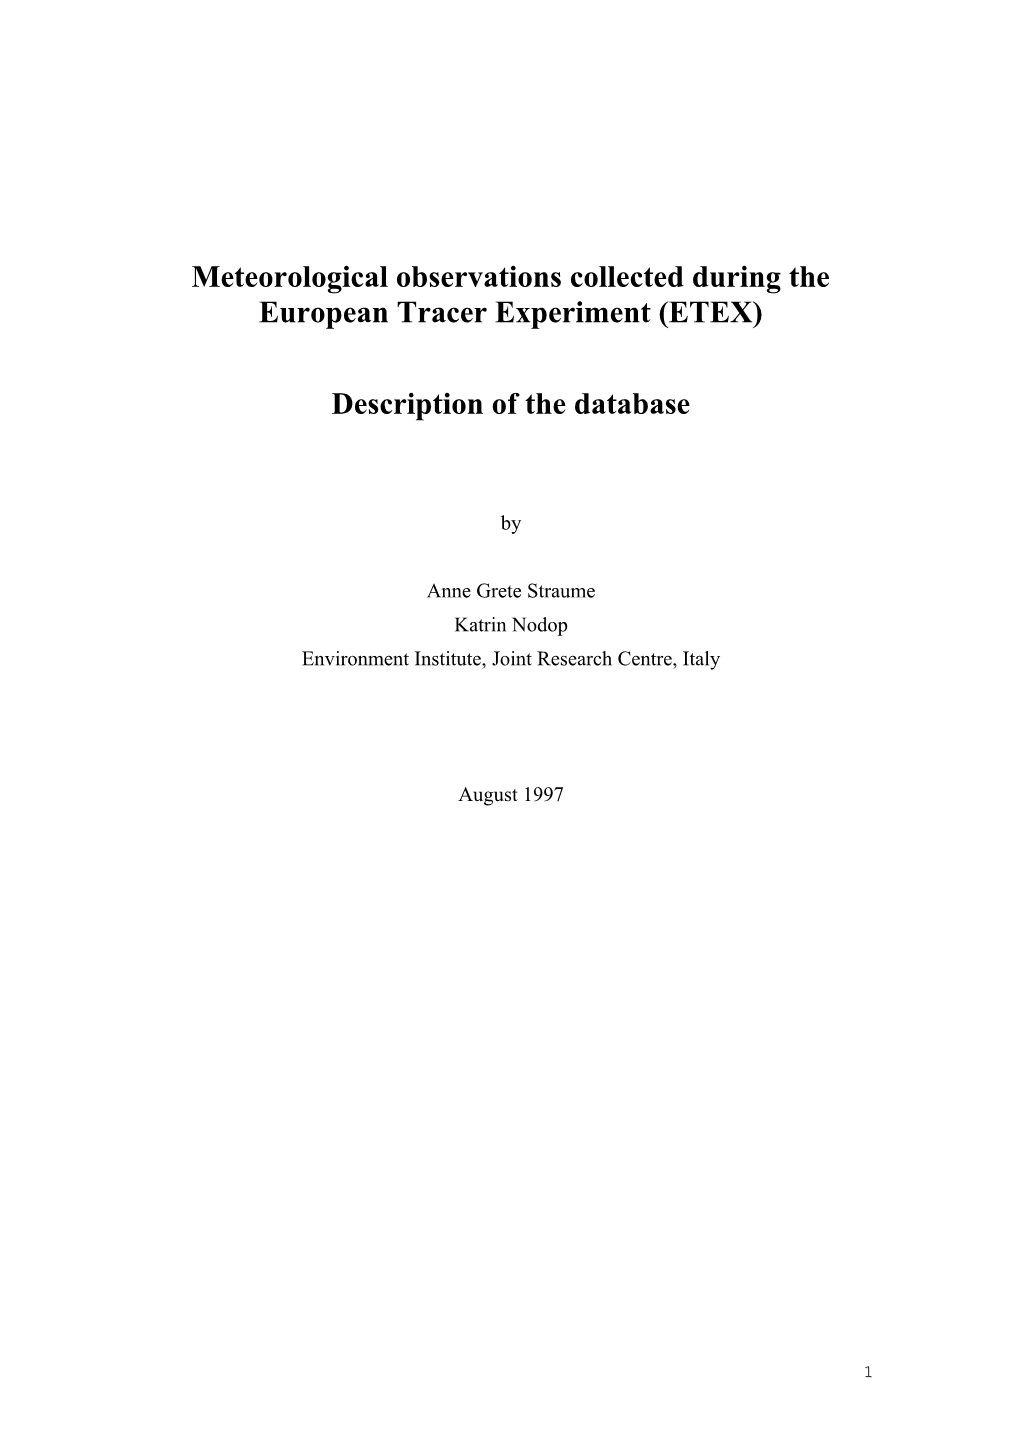 Meteorological Observations Collected During the European Tracer Experiment (ETEX)